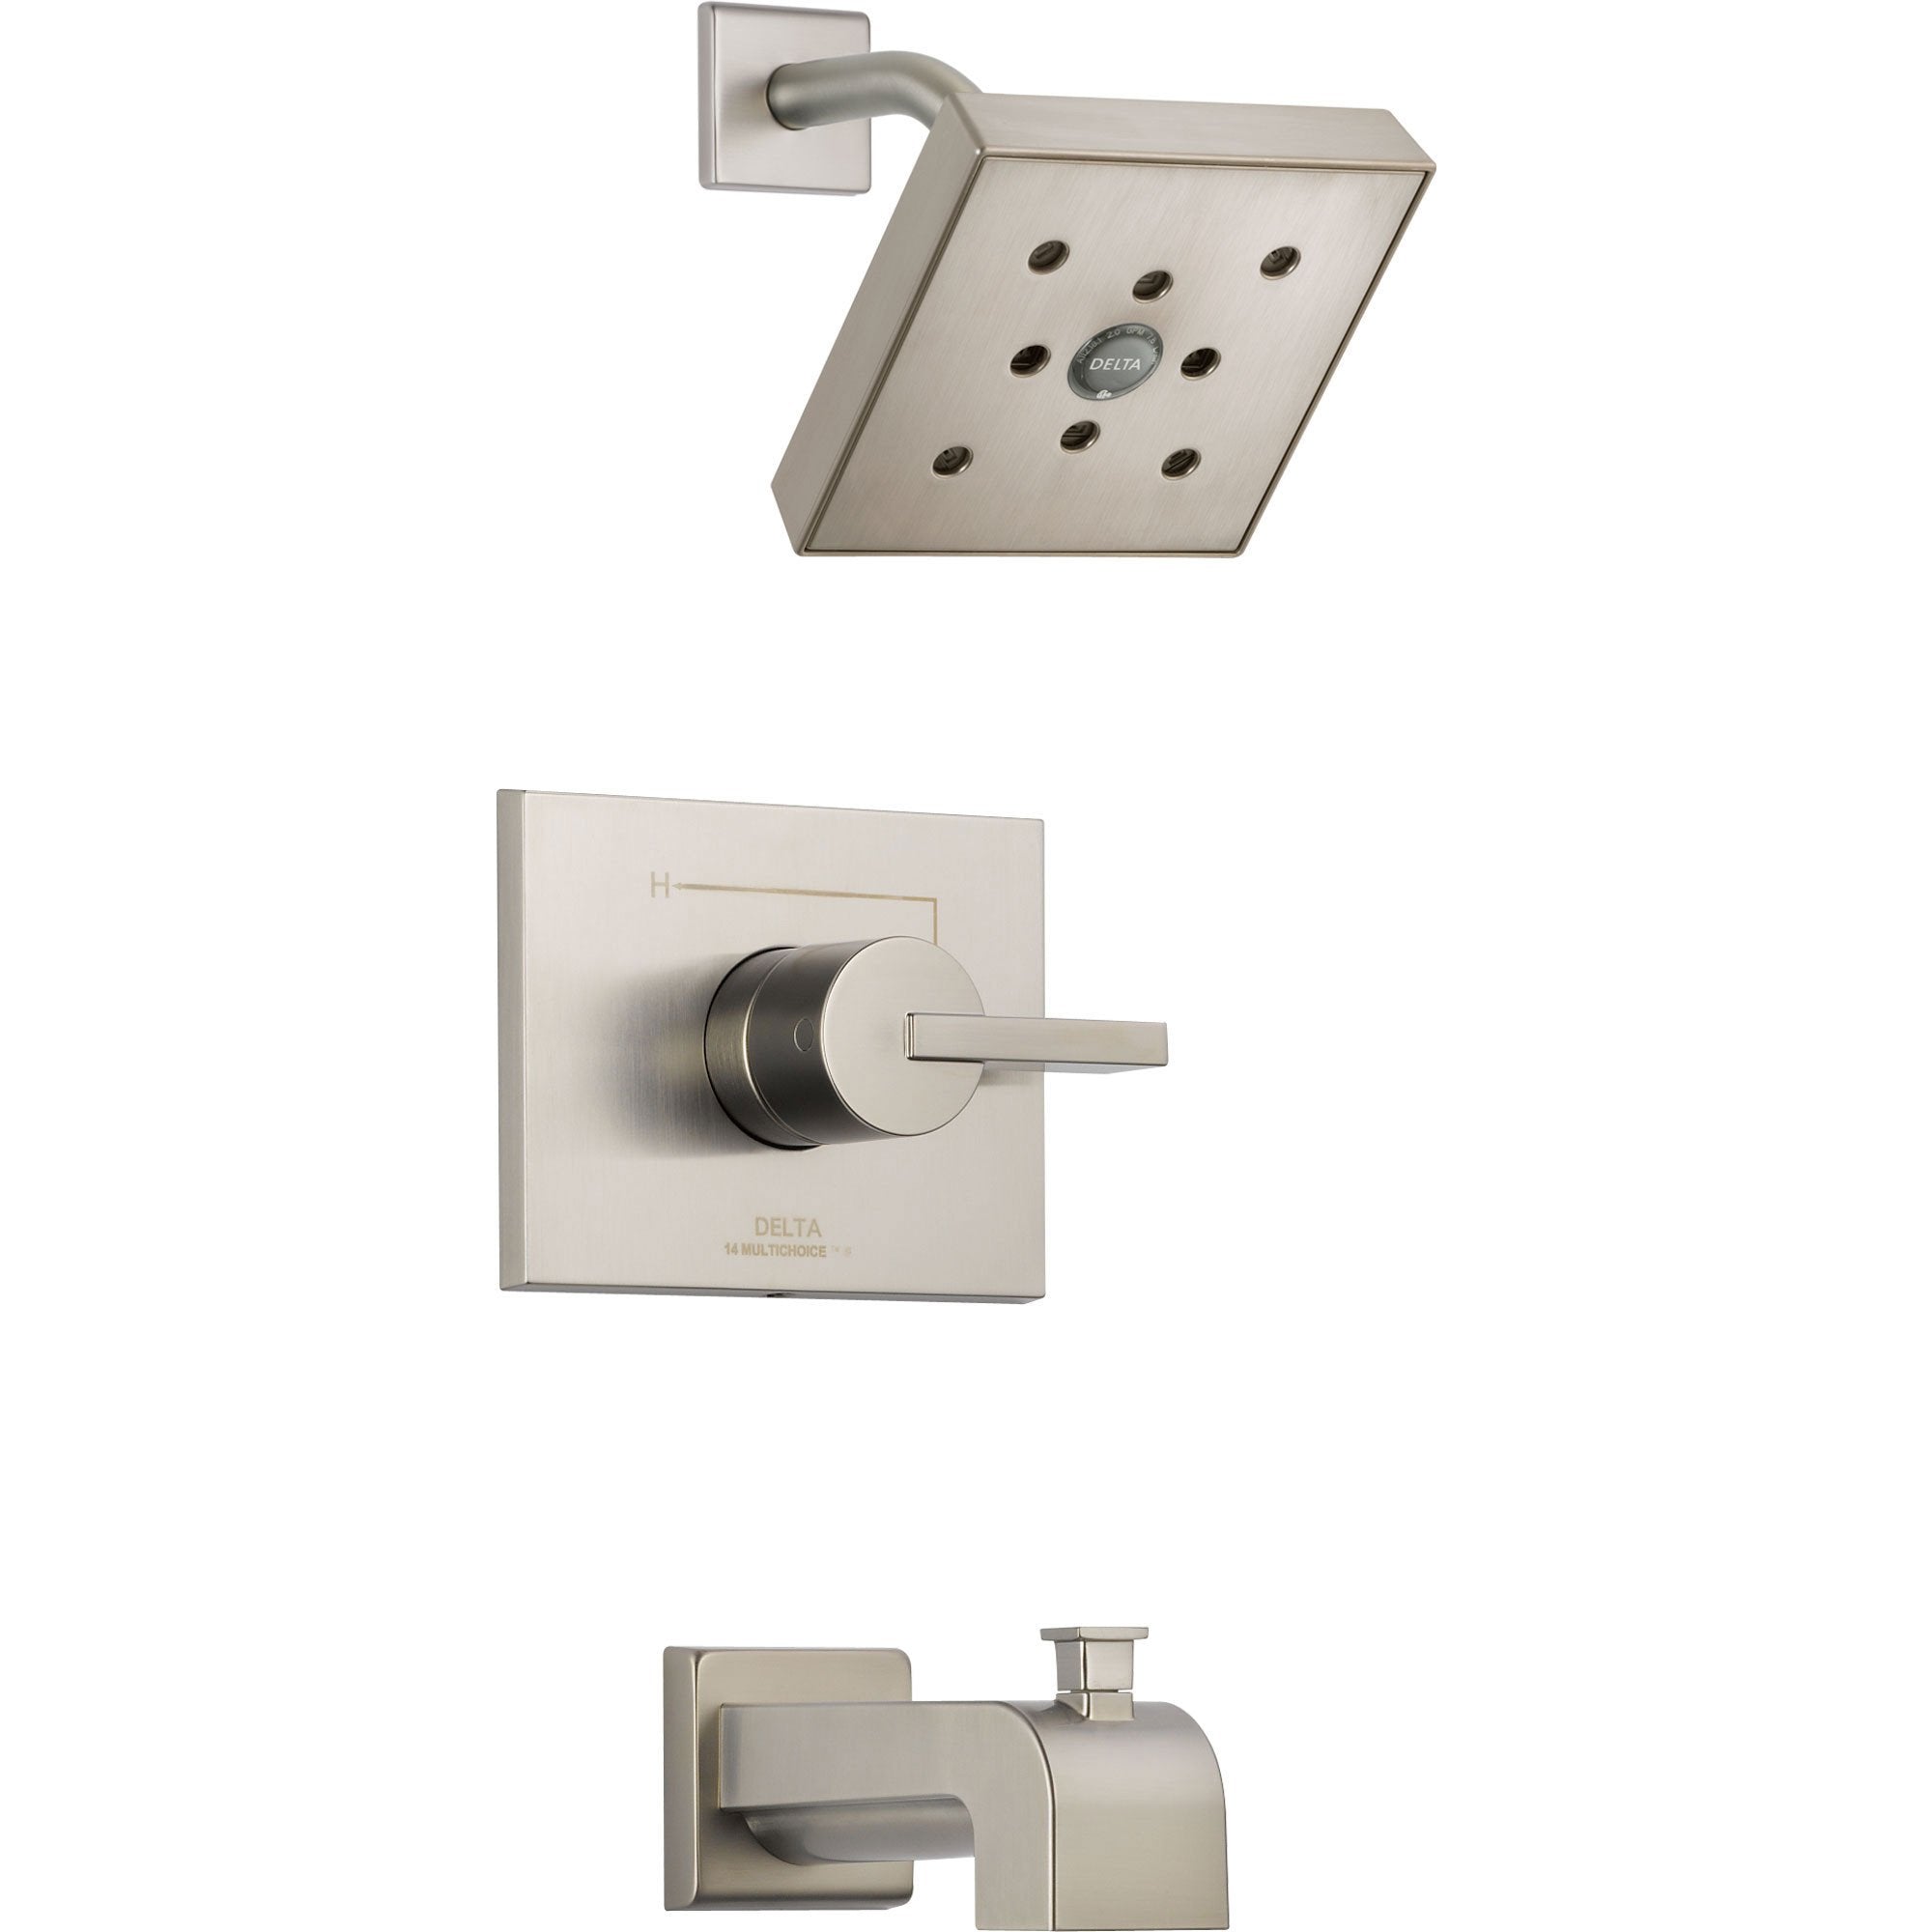 Delta Vero Stainless Steel Finish Tub and Shower Combination with Valve D327V